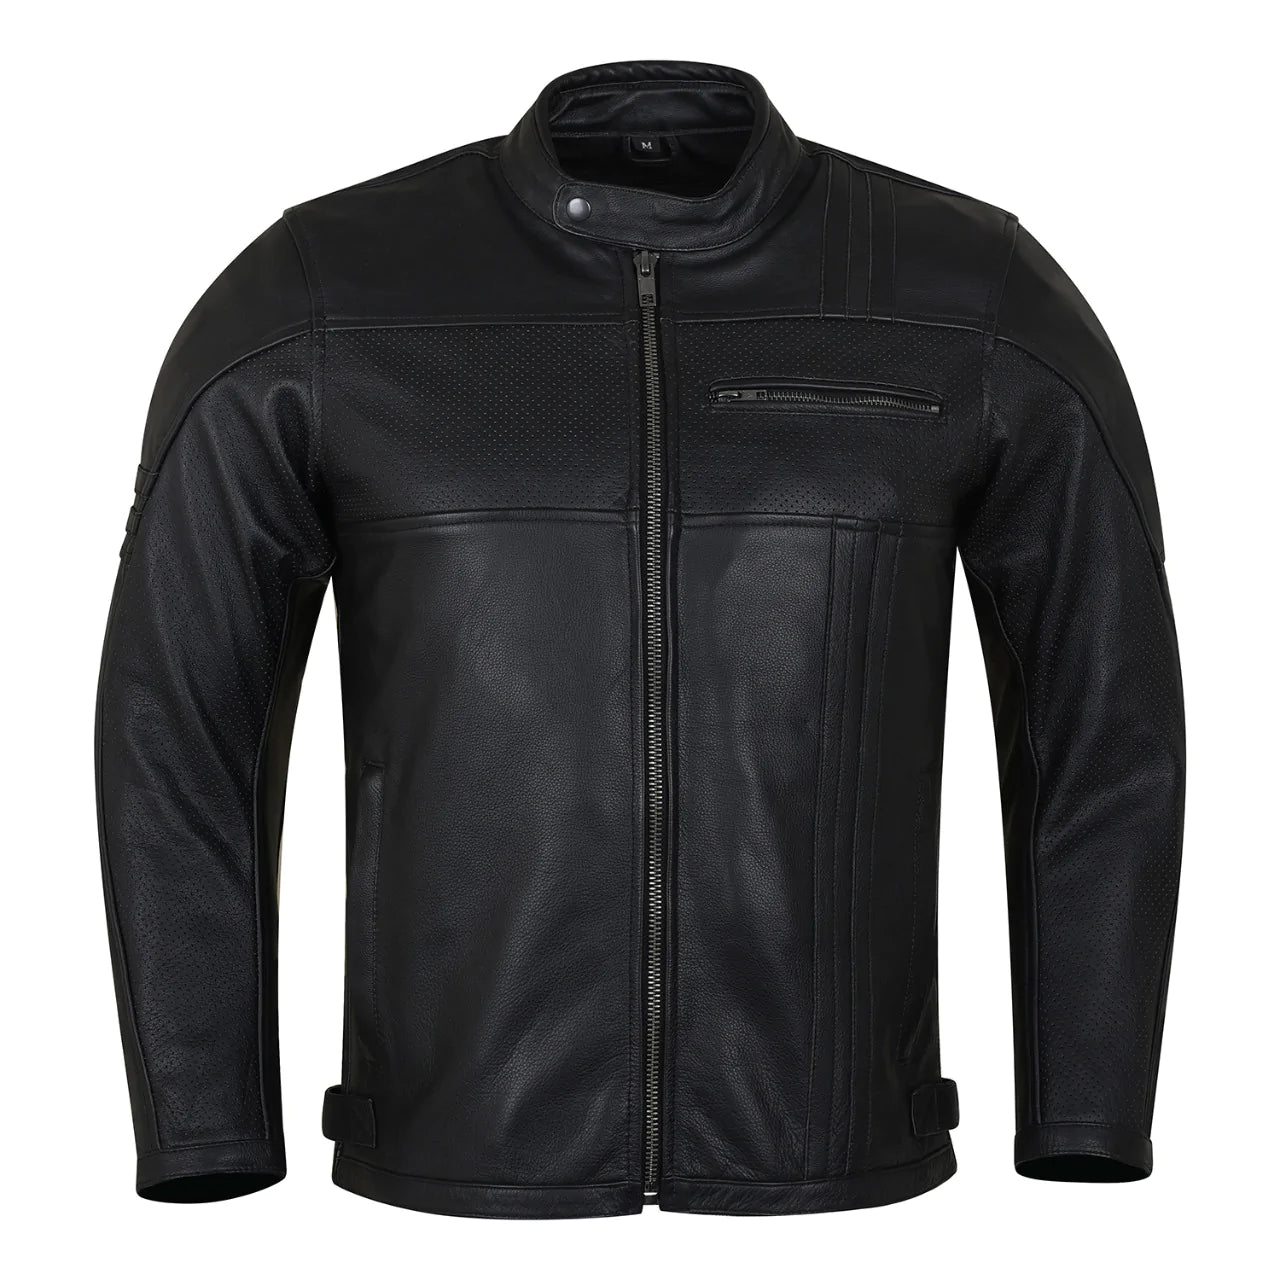 Vance Men's Commuter Cafe Racer Motorcycle Leather Jacket with Armor